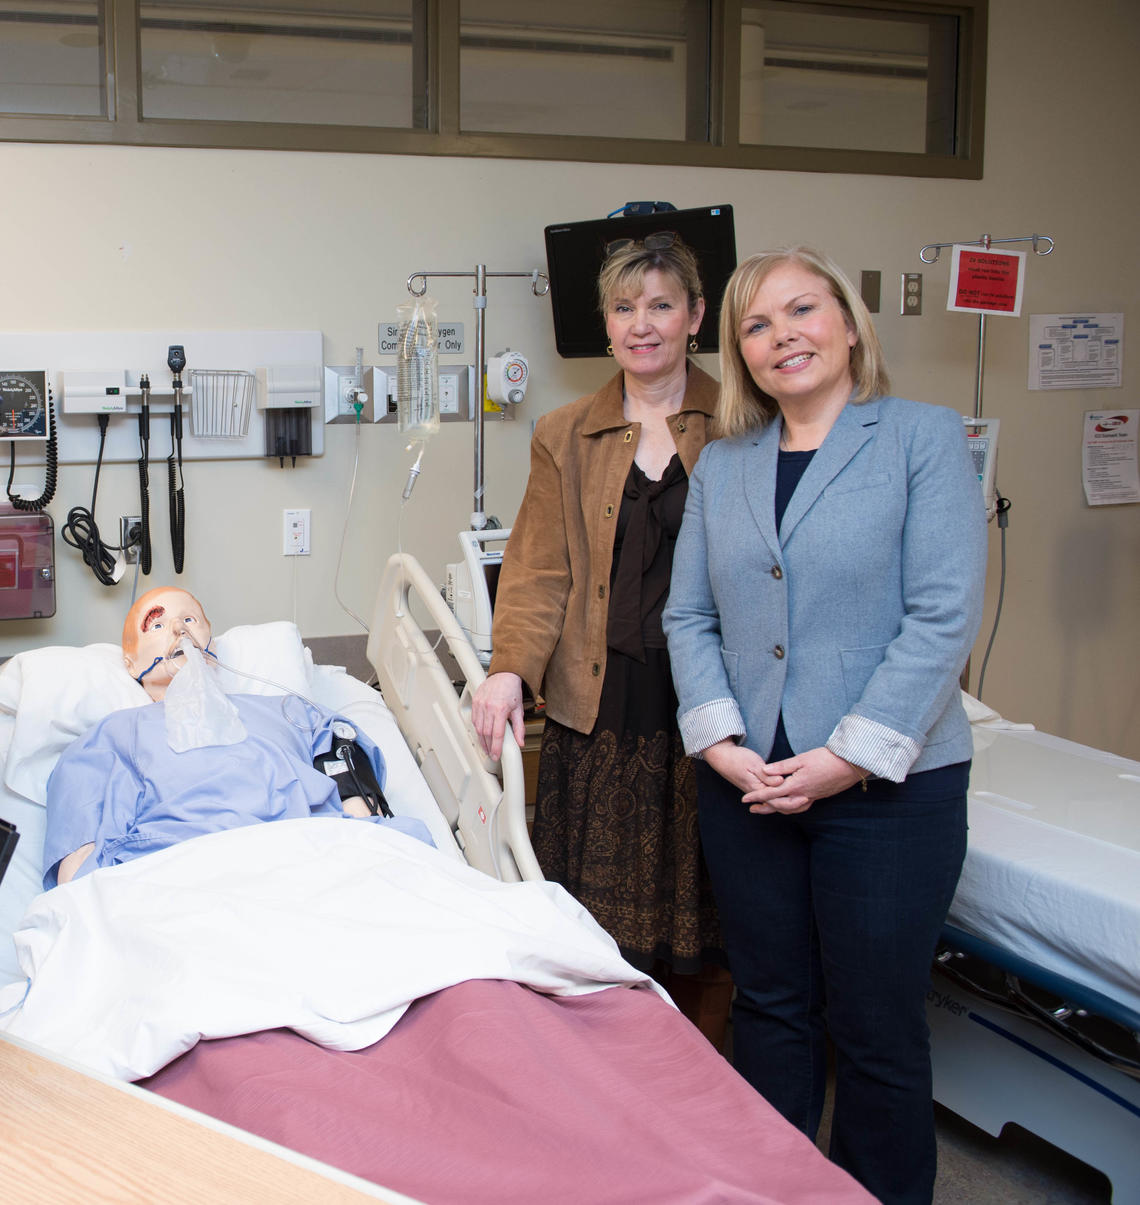 Linda Duffett-Leger, right, and Sandra Goldsworthy, both experts in simulation research and education, are joining the Faculty of Nursing at the University of Calgary.